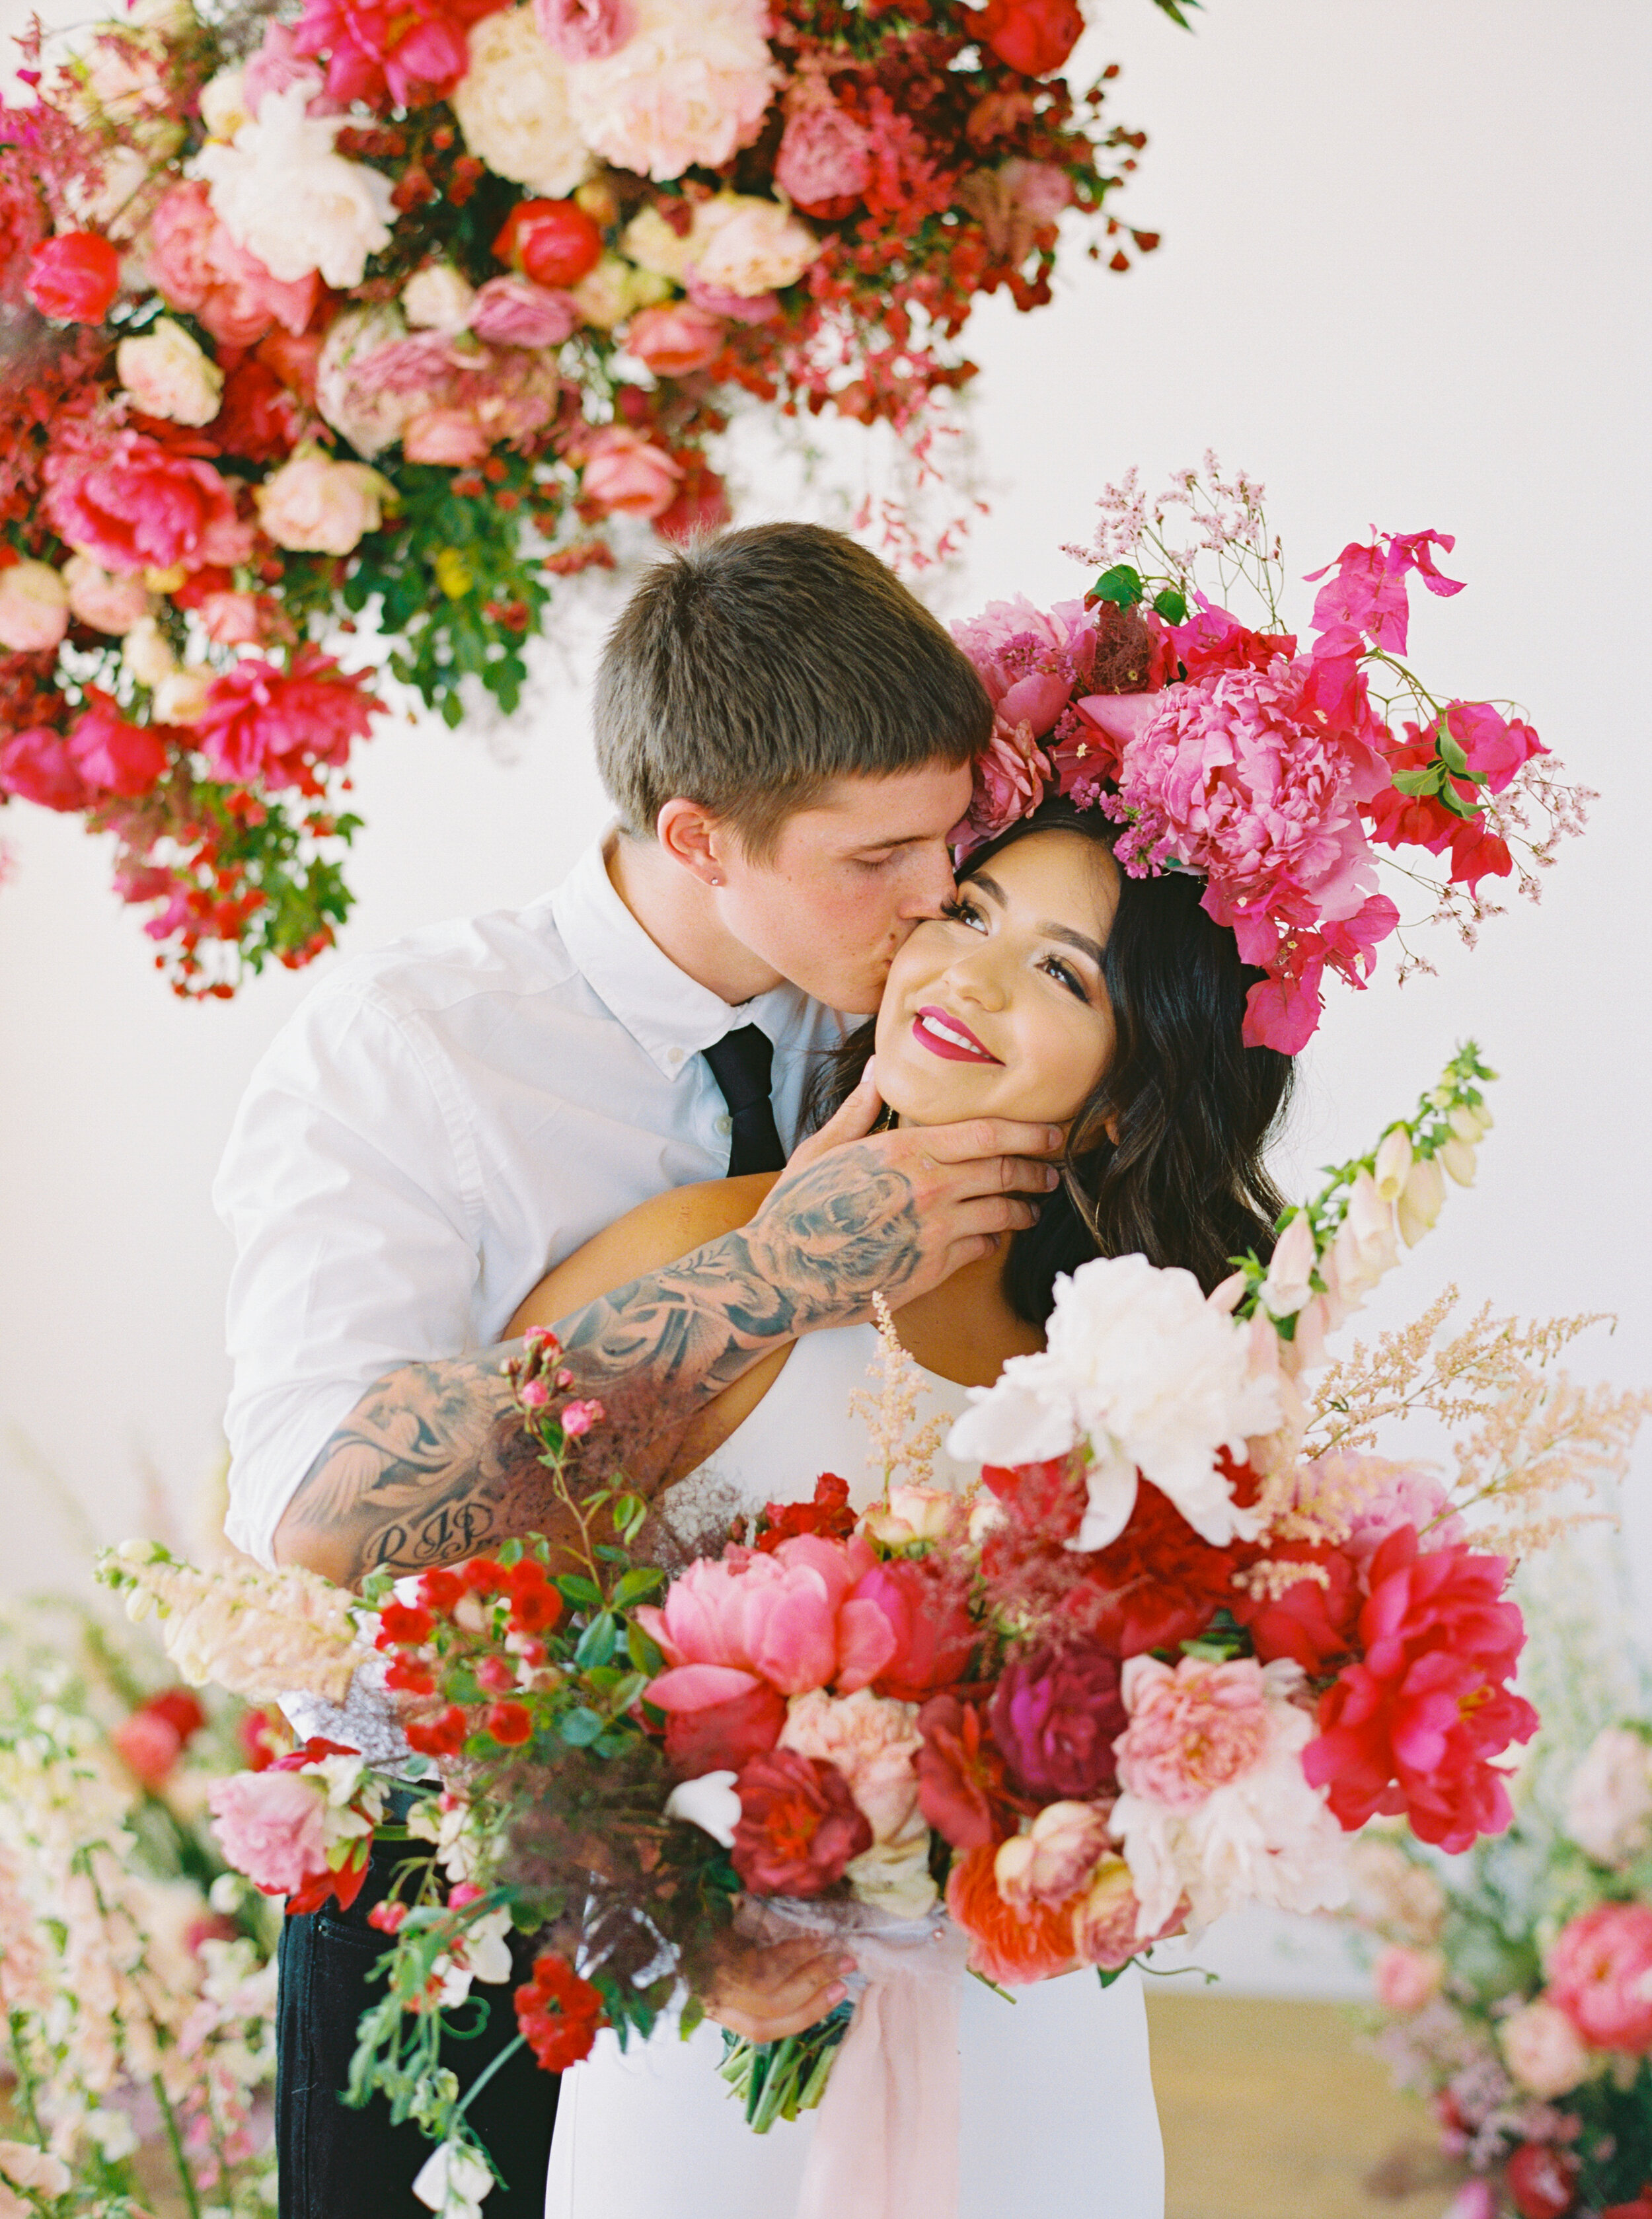 A Romantic Wedding Elopement Filled with Colorful Fuchsia - Sarahi Hadden Submission-12.jpg